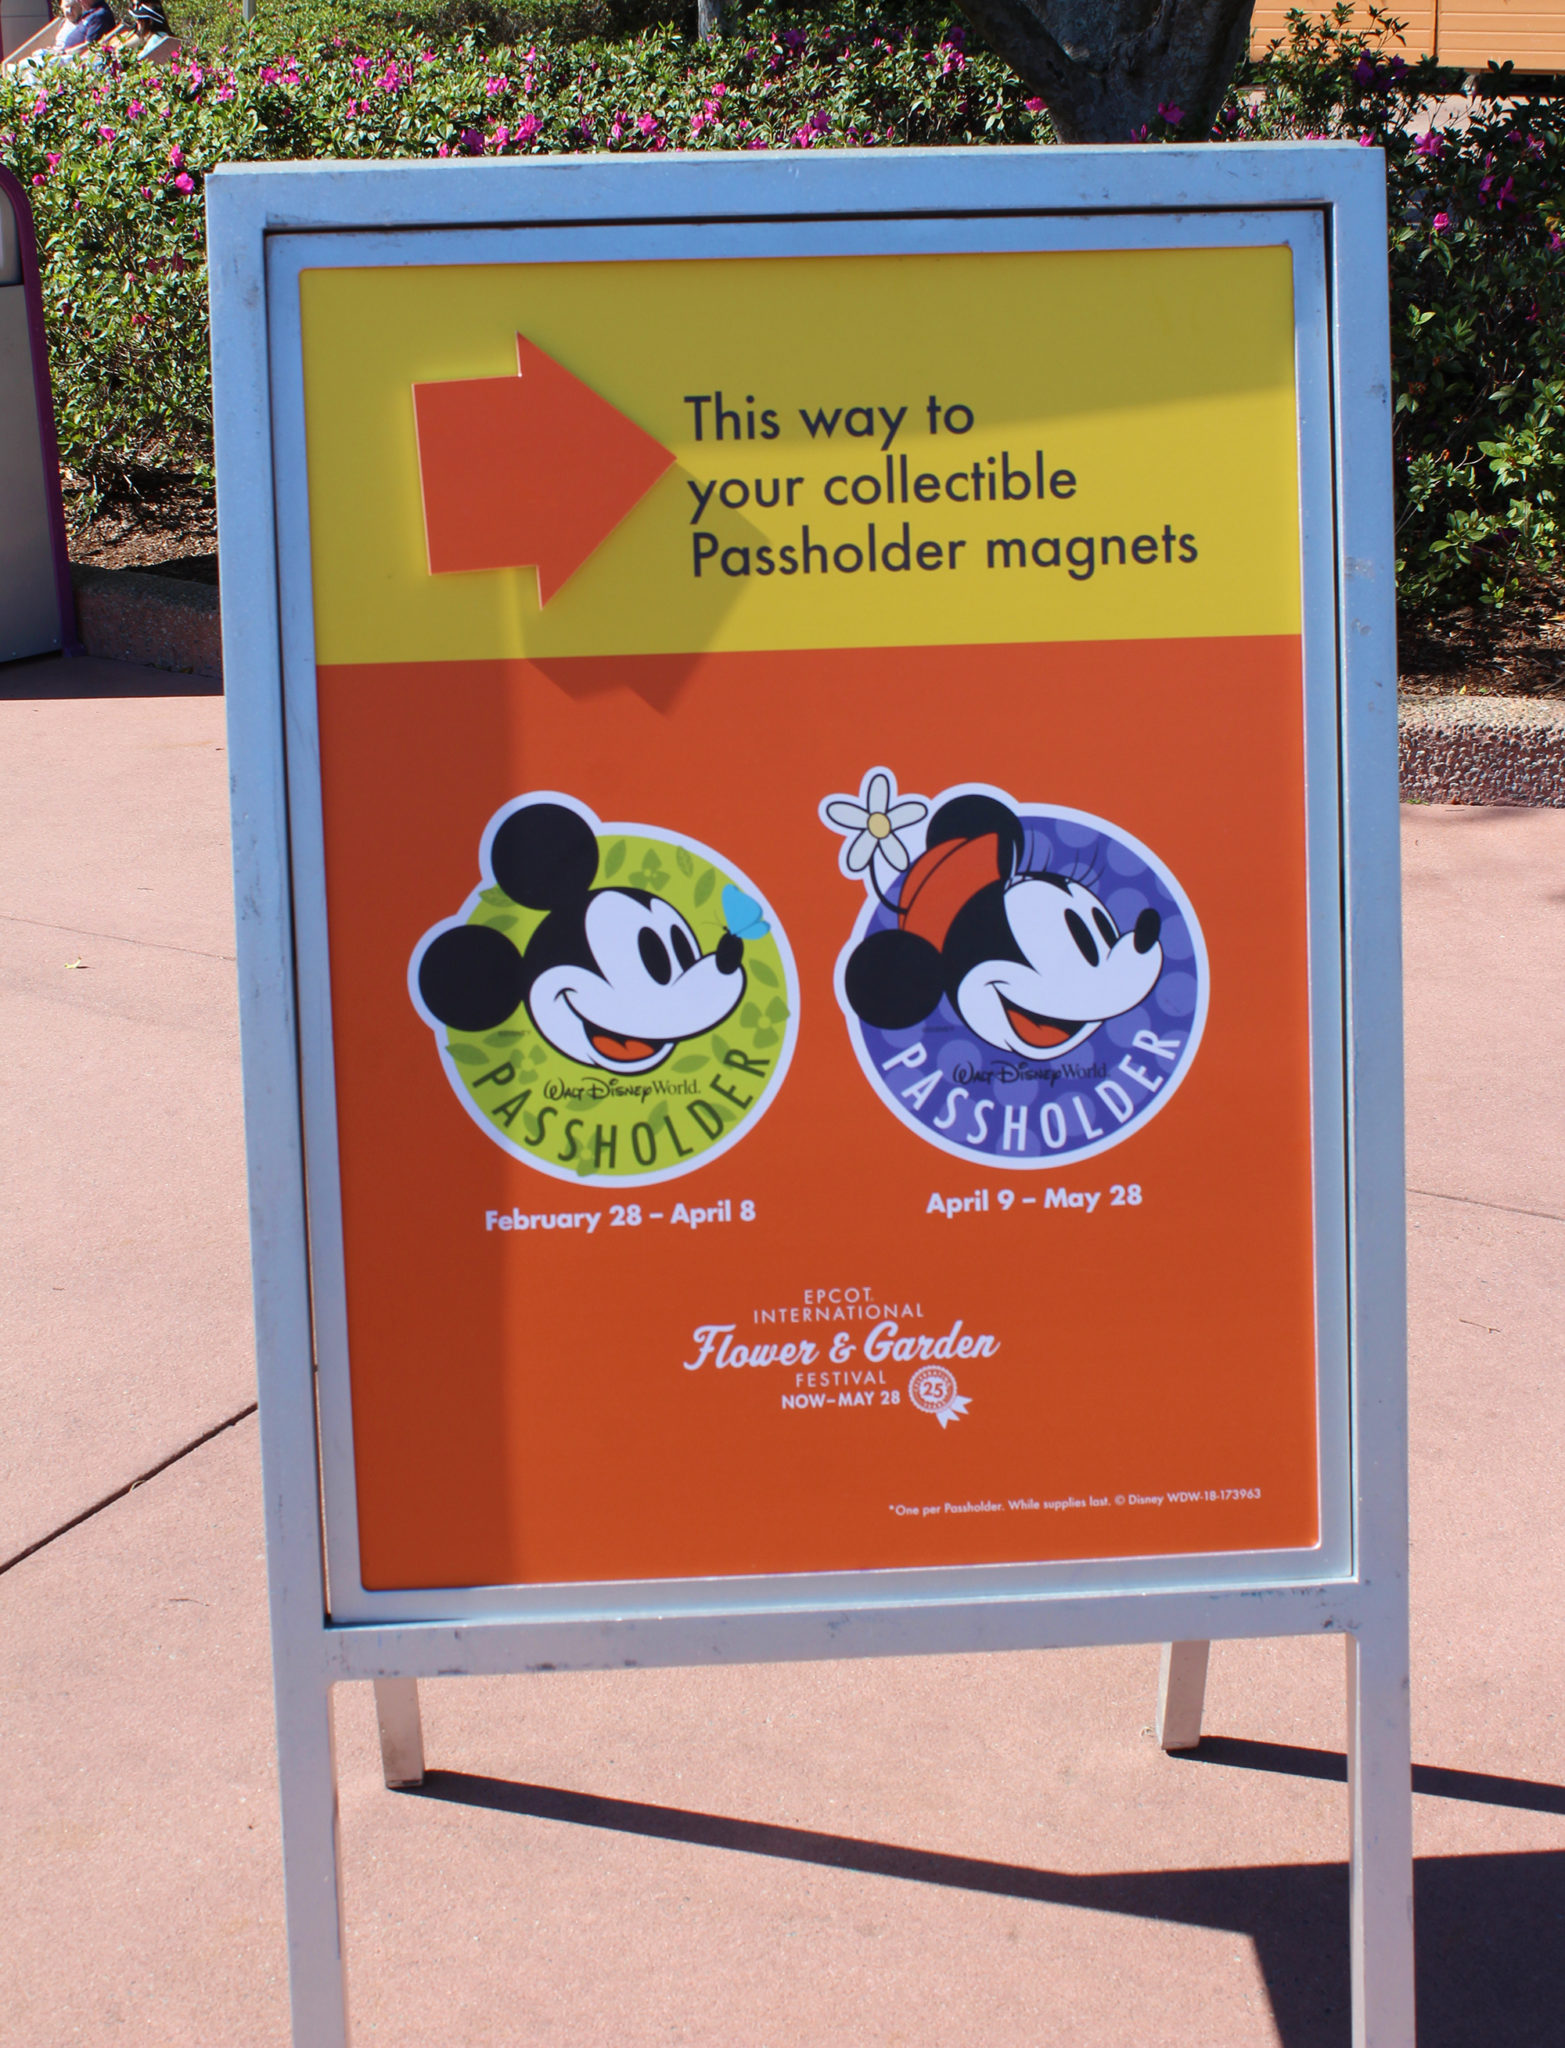 A sign showing the two free magnets for annual passholders at Flower and Garden.